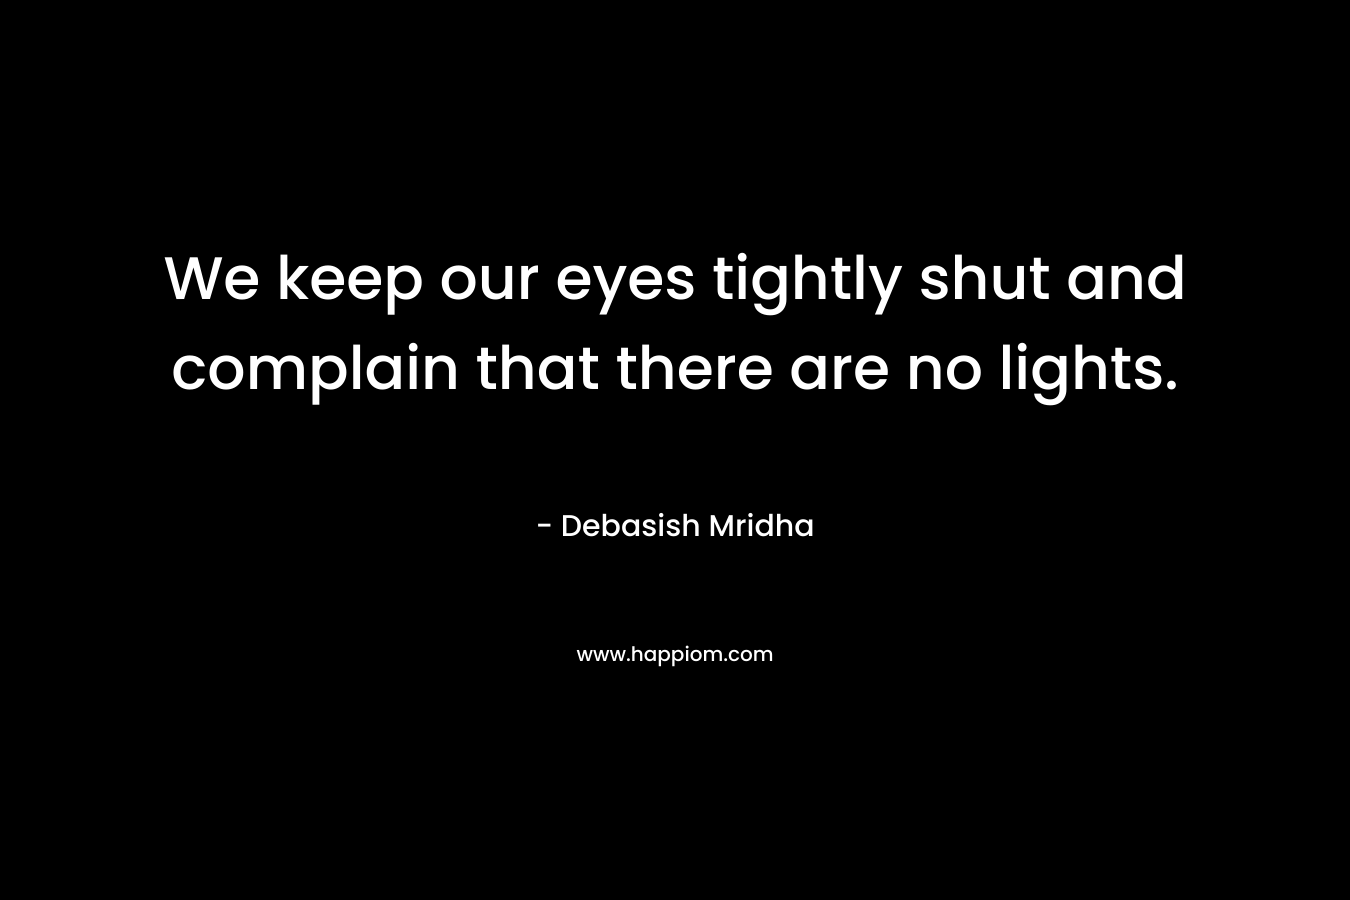 We keep our eyes tightly shut and complain that there are no lights. – Debasish Mridha